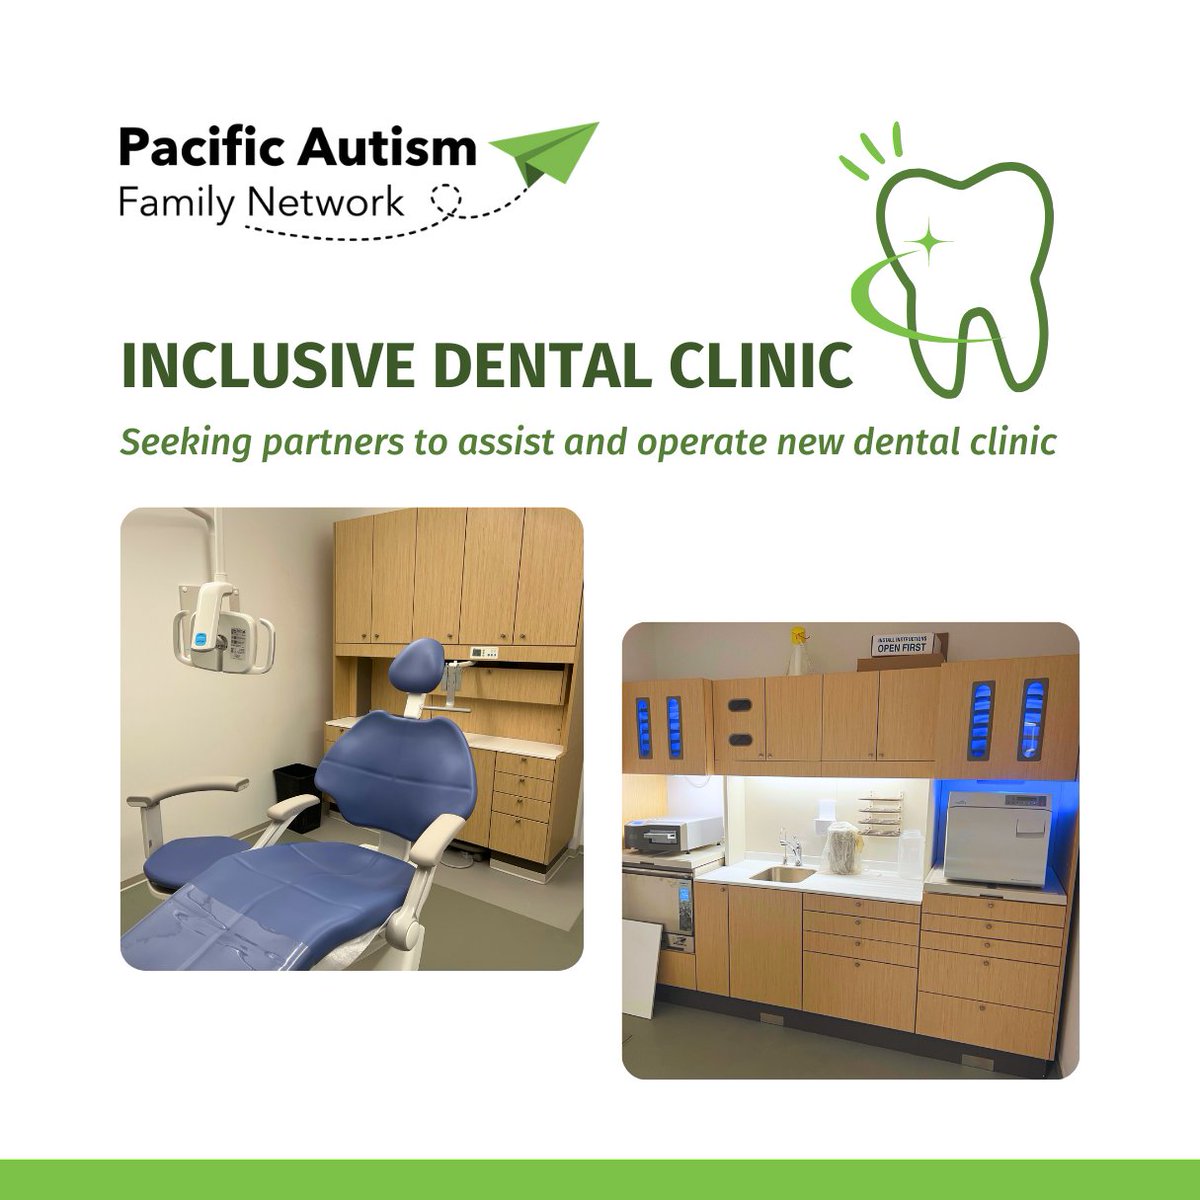 #PAFN is seeking collaborators to help operate our new dental clinic in Richmond, B.C. We are open to exploring various operational models and business arrangements to enhance access to dental care, aligning with the new Canadian Dental Plan. Our clinic's primary focus is to